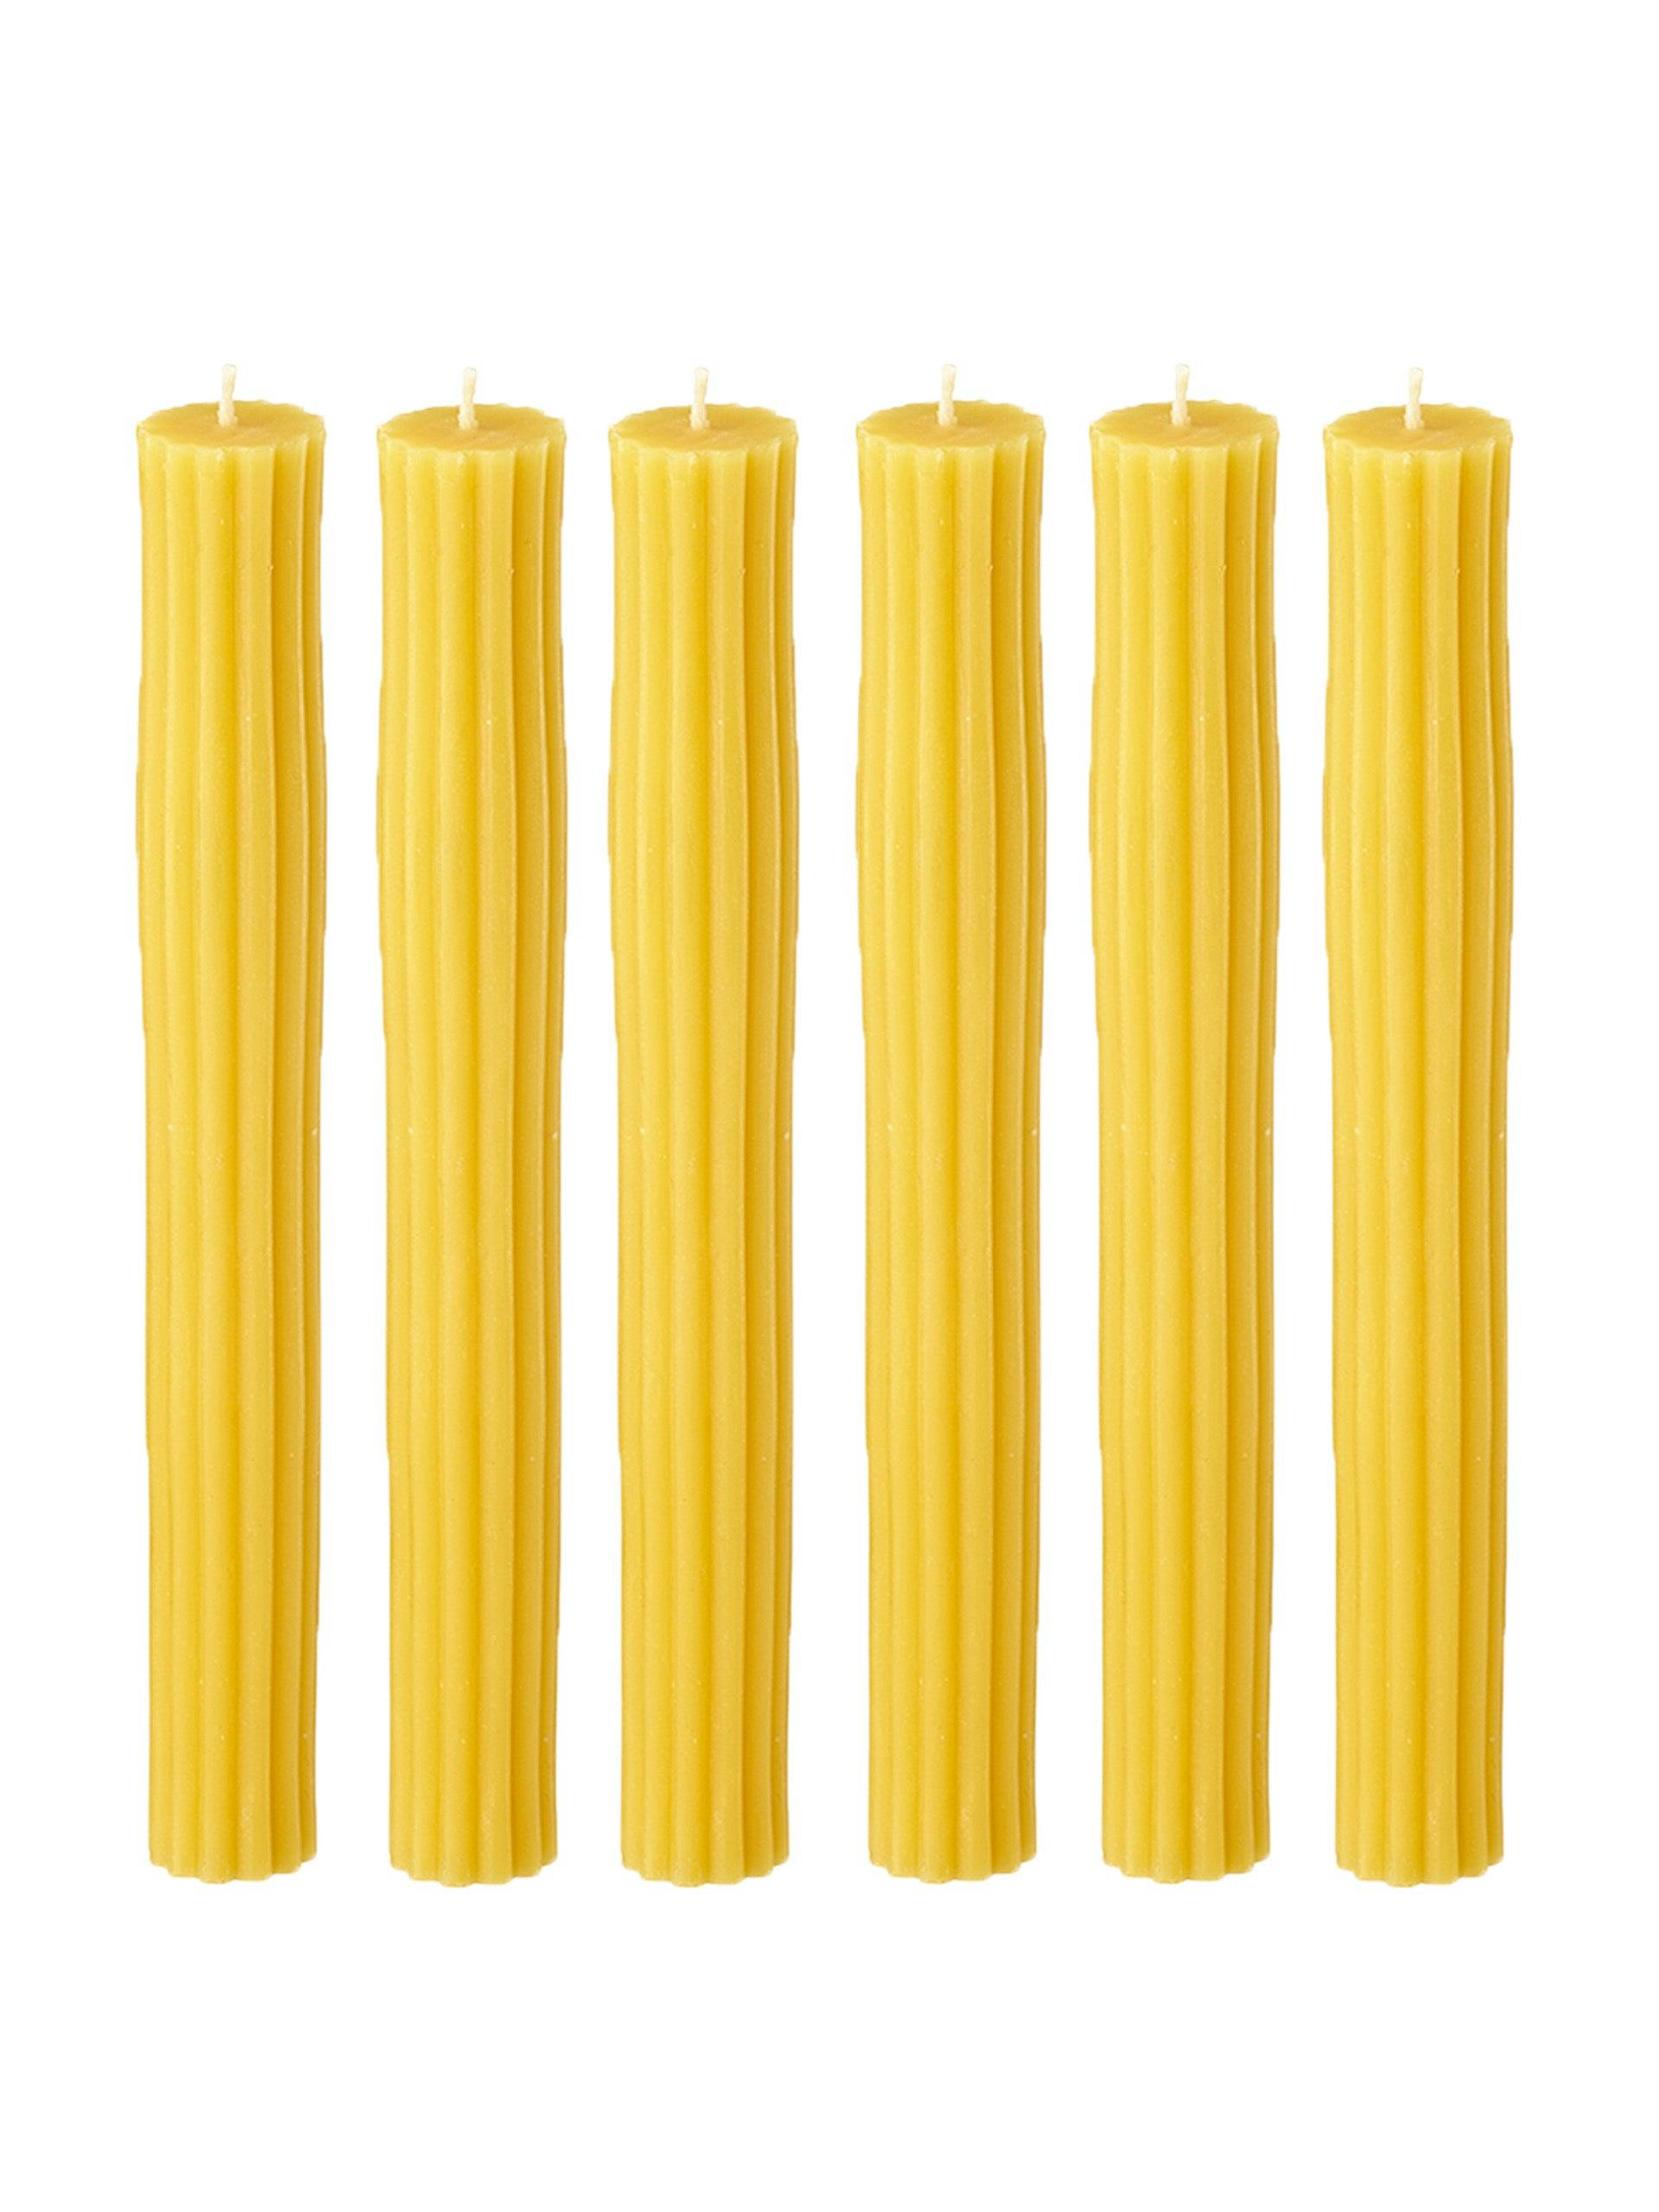 Ribbed beeswax candles (set of 6)